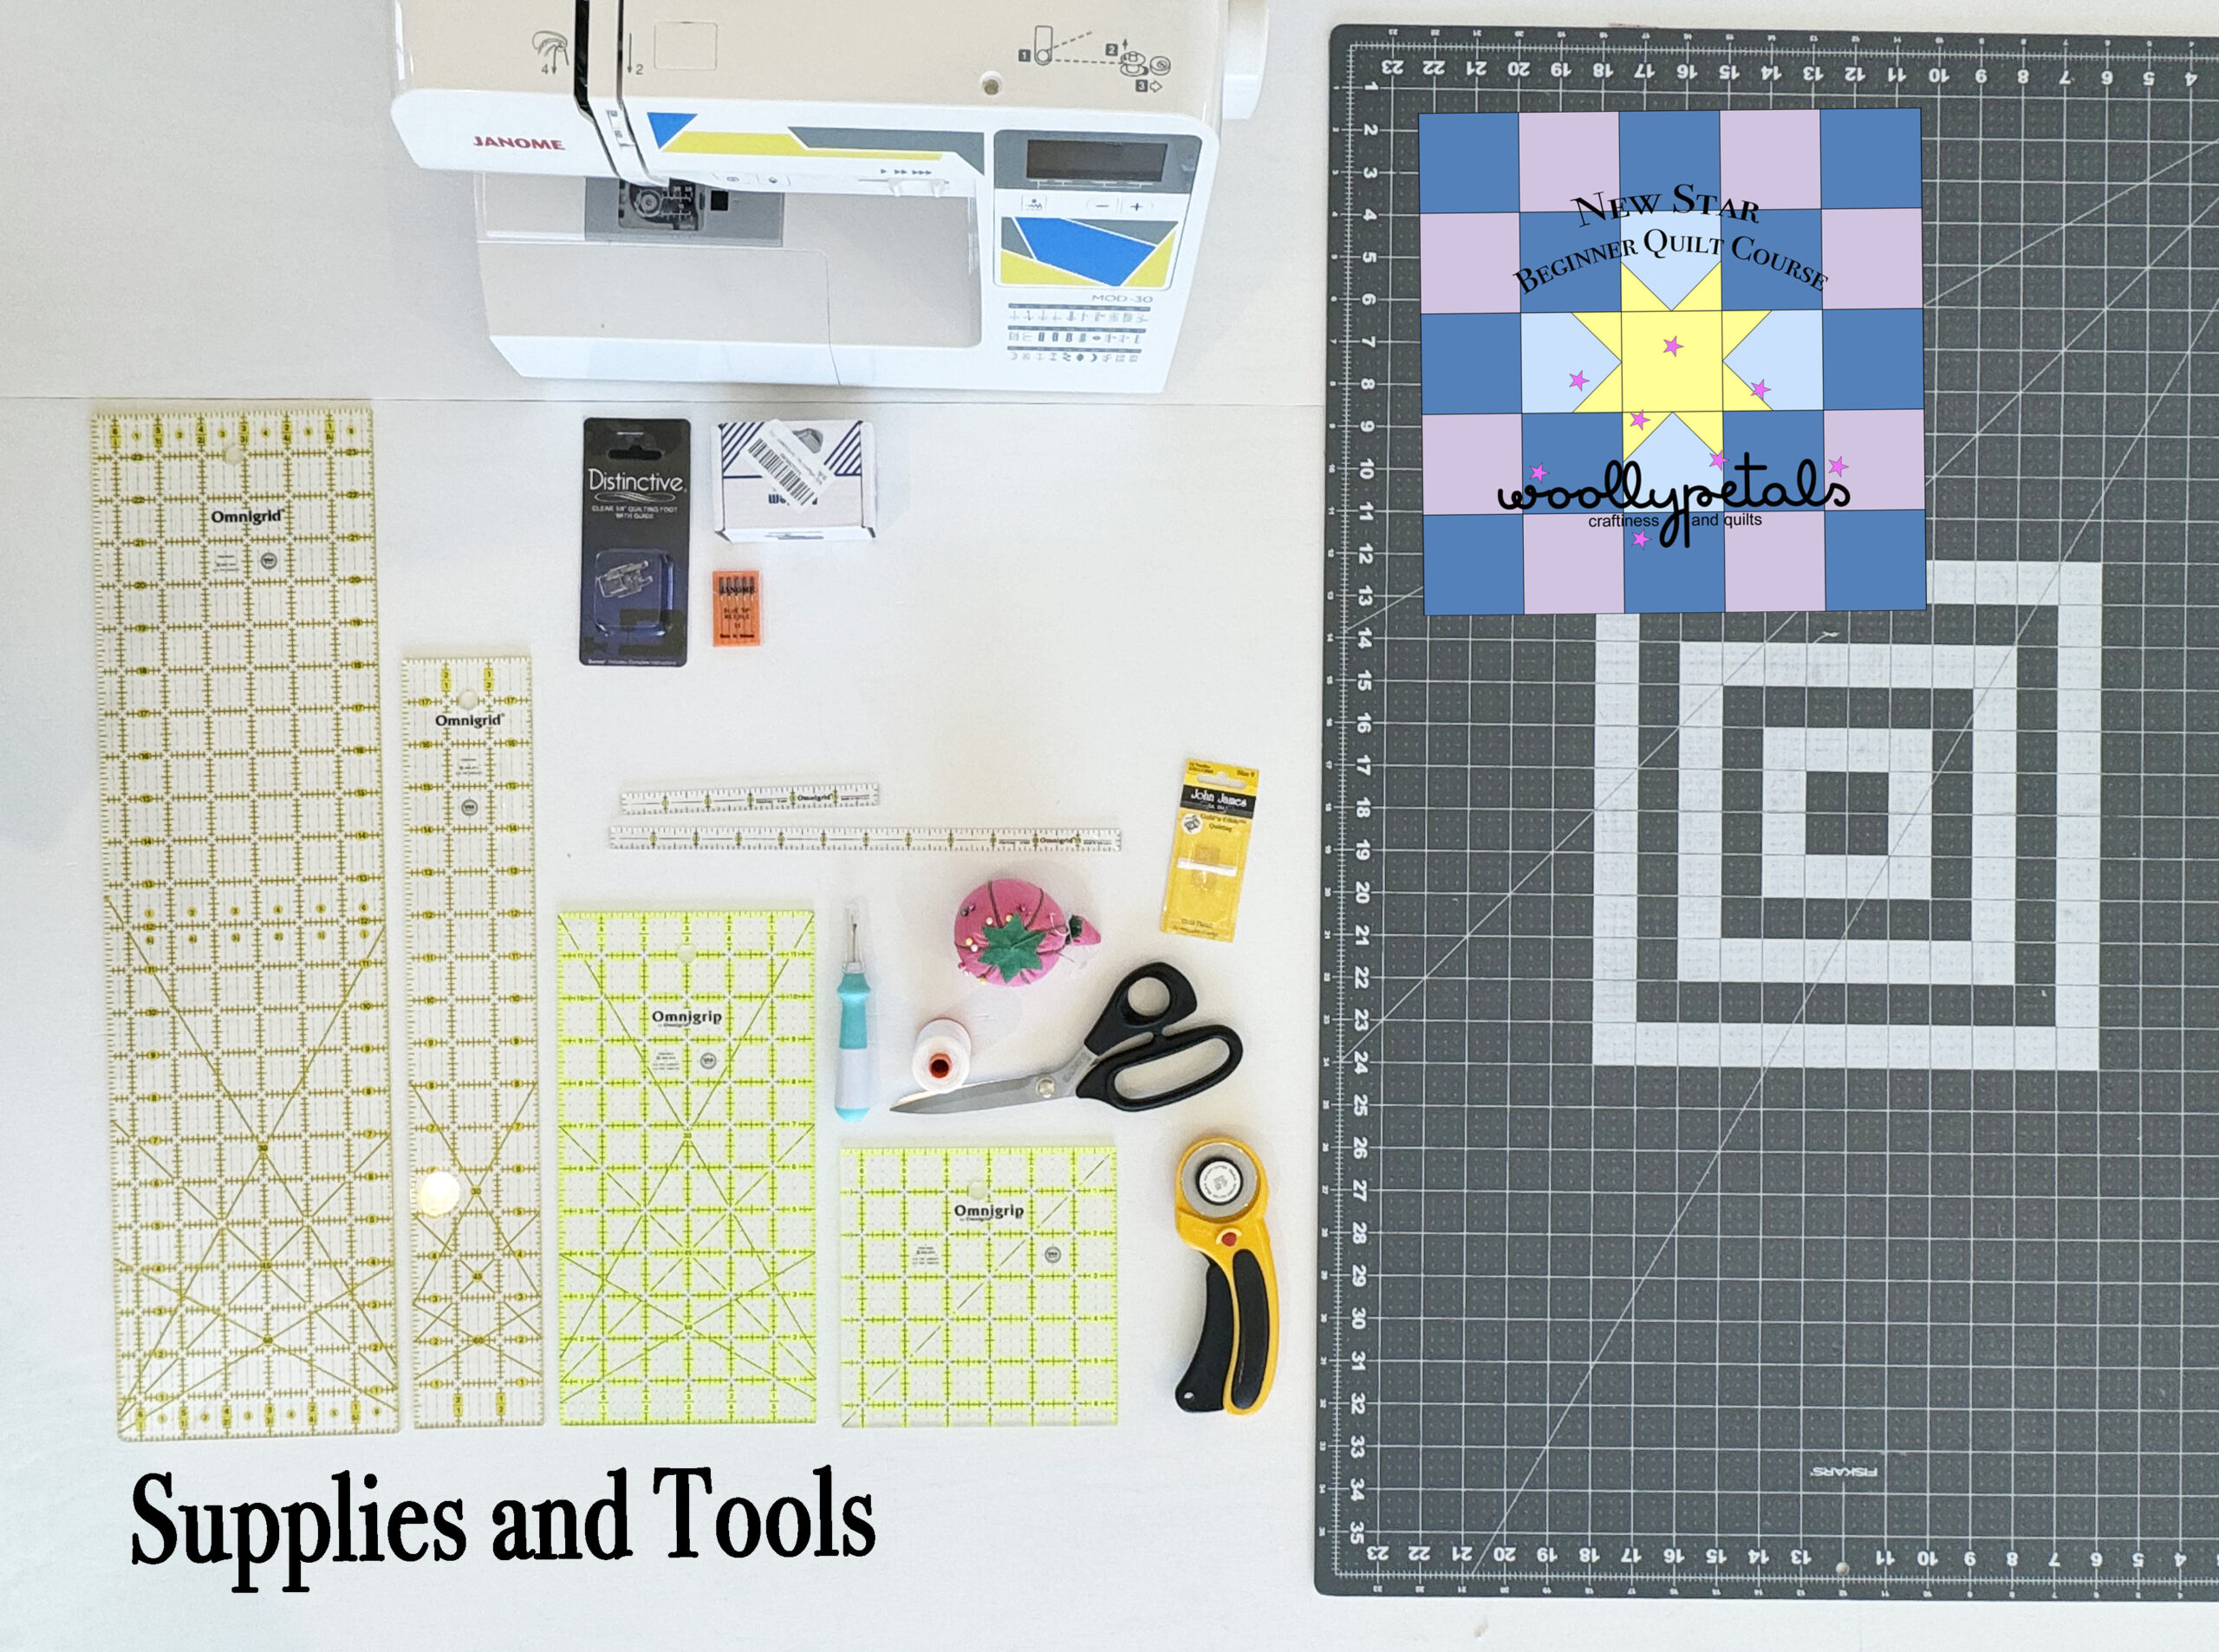 New Star Beginner Quilt Course Info about Supplies and tools